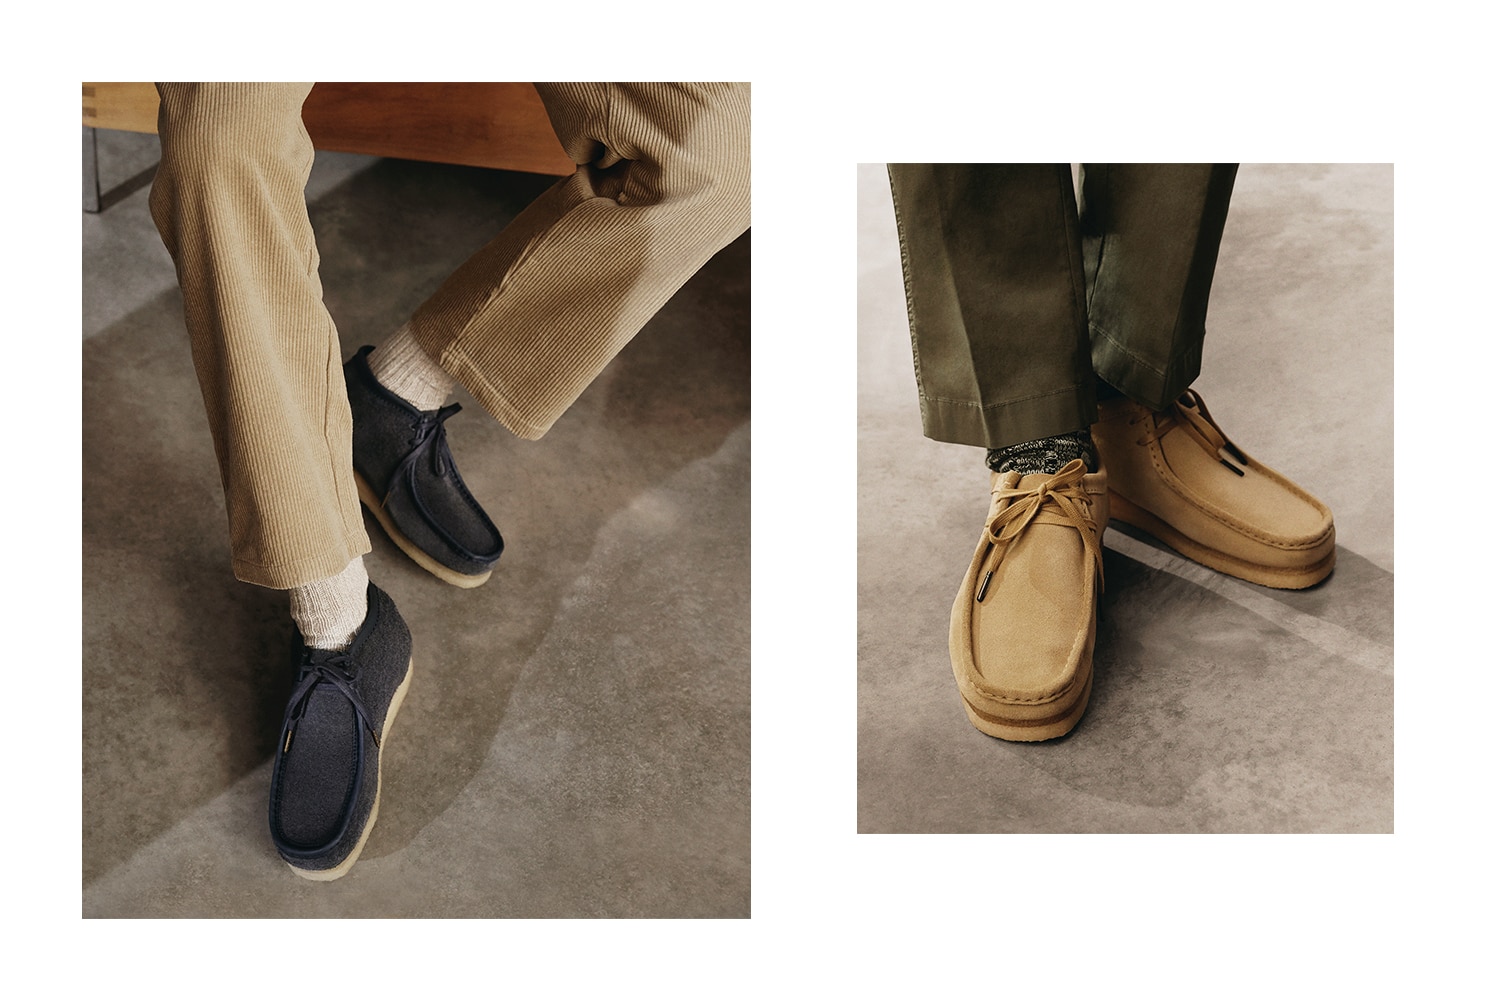 Make This Year With Shoes From Clarks Originals | The Journal | MR PORTER